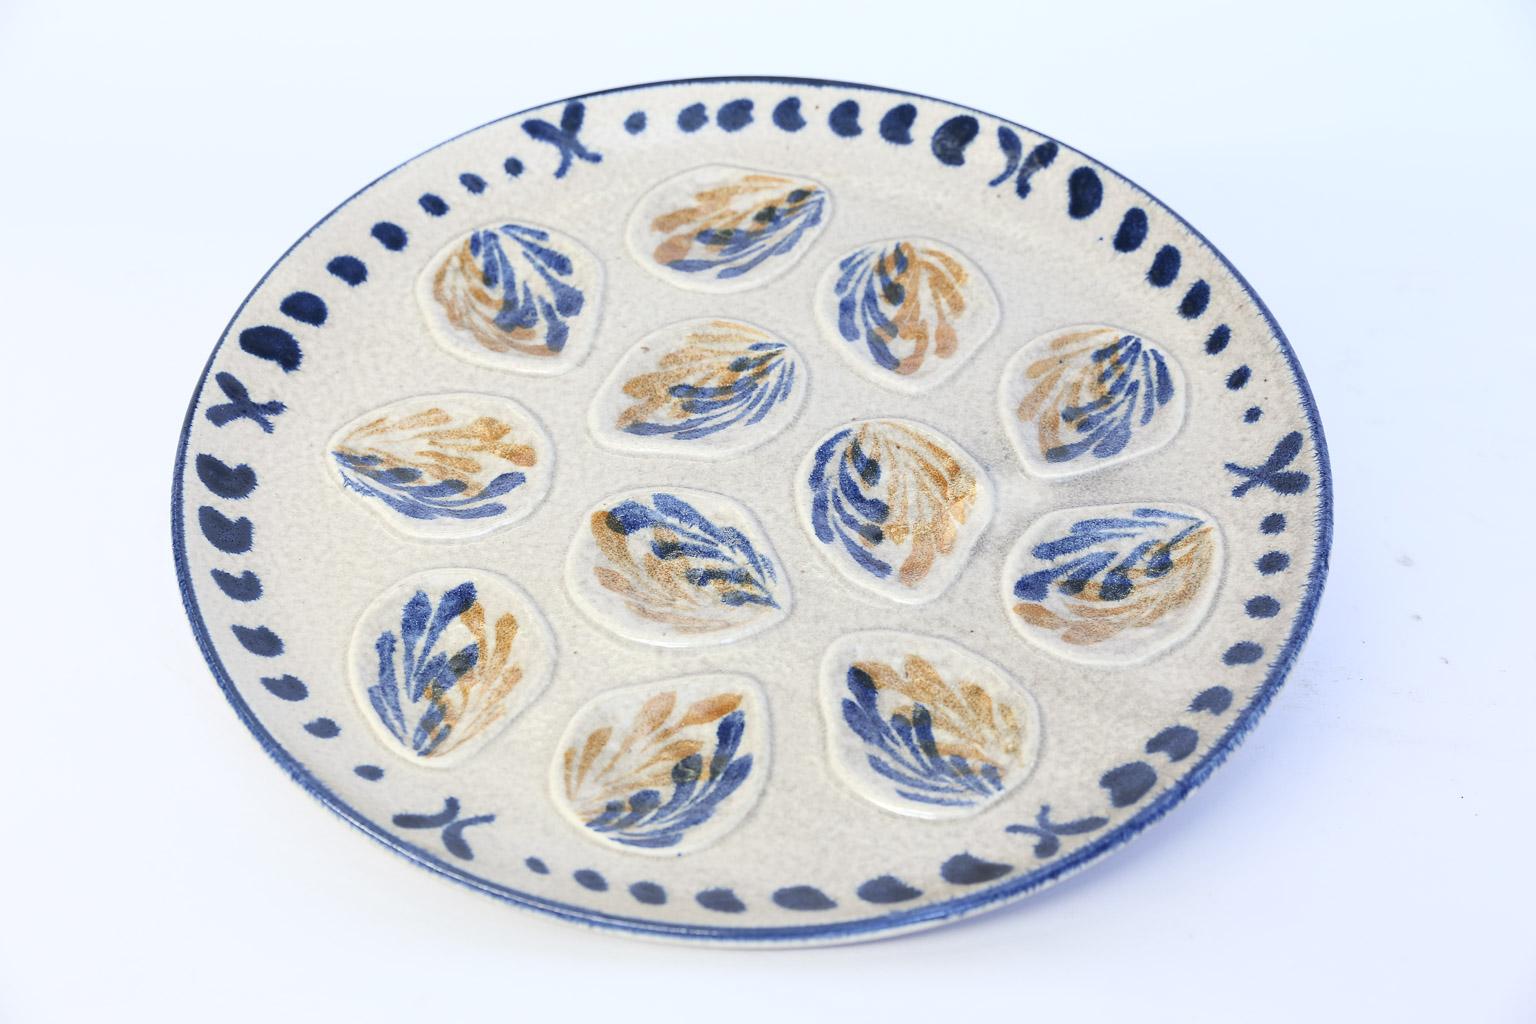 This is a wonderful French twelve well oyster platter. The platter has twelve wells for serving oysters. The hand painted pattern depicts leaves in blue and orange on a beige background. Although there is no mark on the back, this platter was made